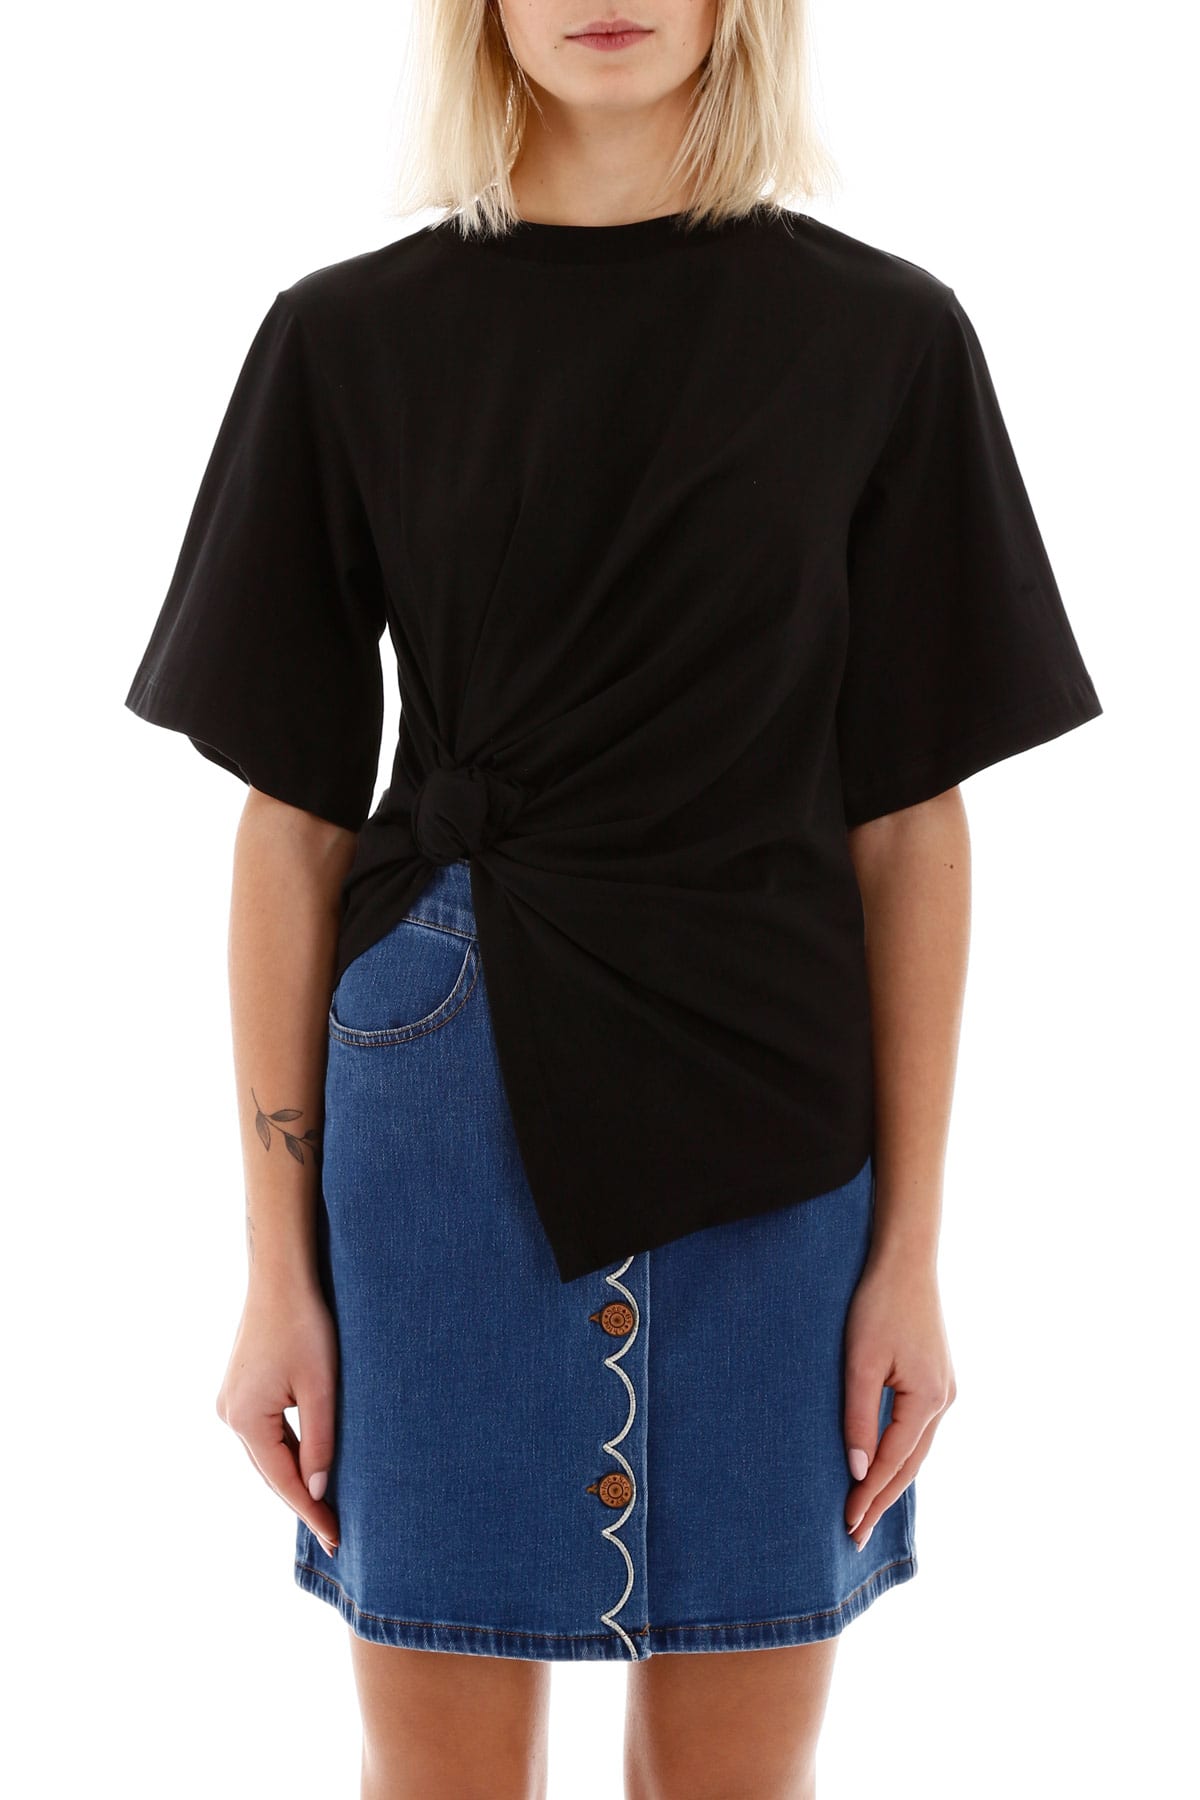 SEE BY CHLOÉ KNOT T-SHIRT,11228823